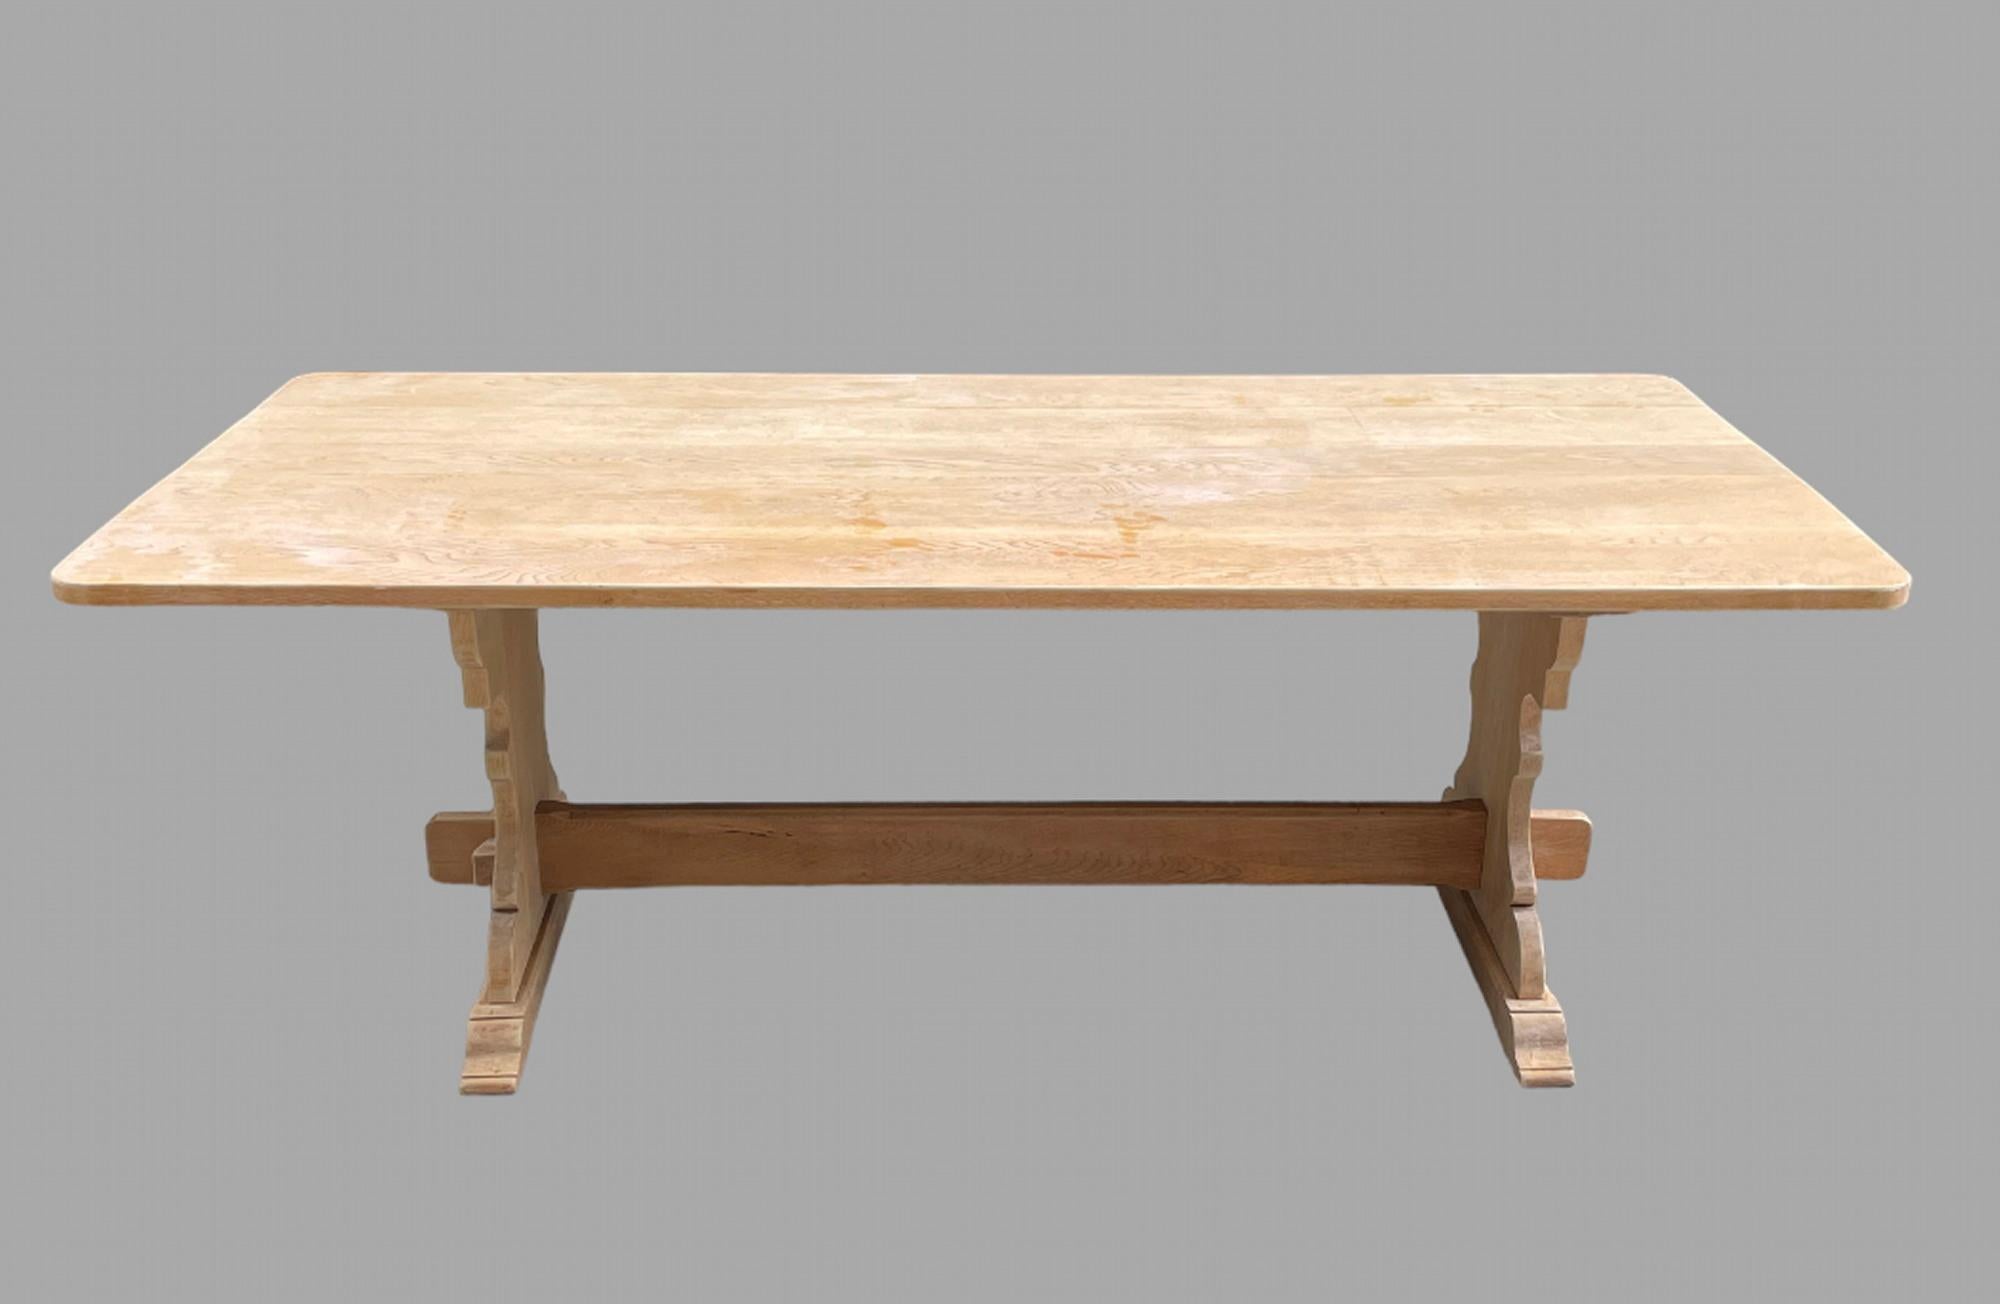 A Good Sized and Proportioned Stripped Oak Trestle Table with great leg room of 72 cm and seat eight comfortably.